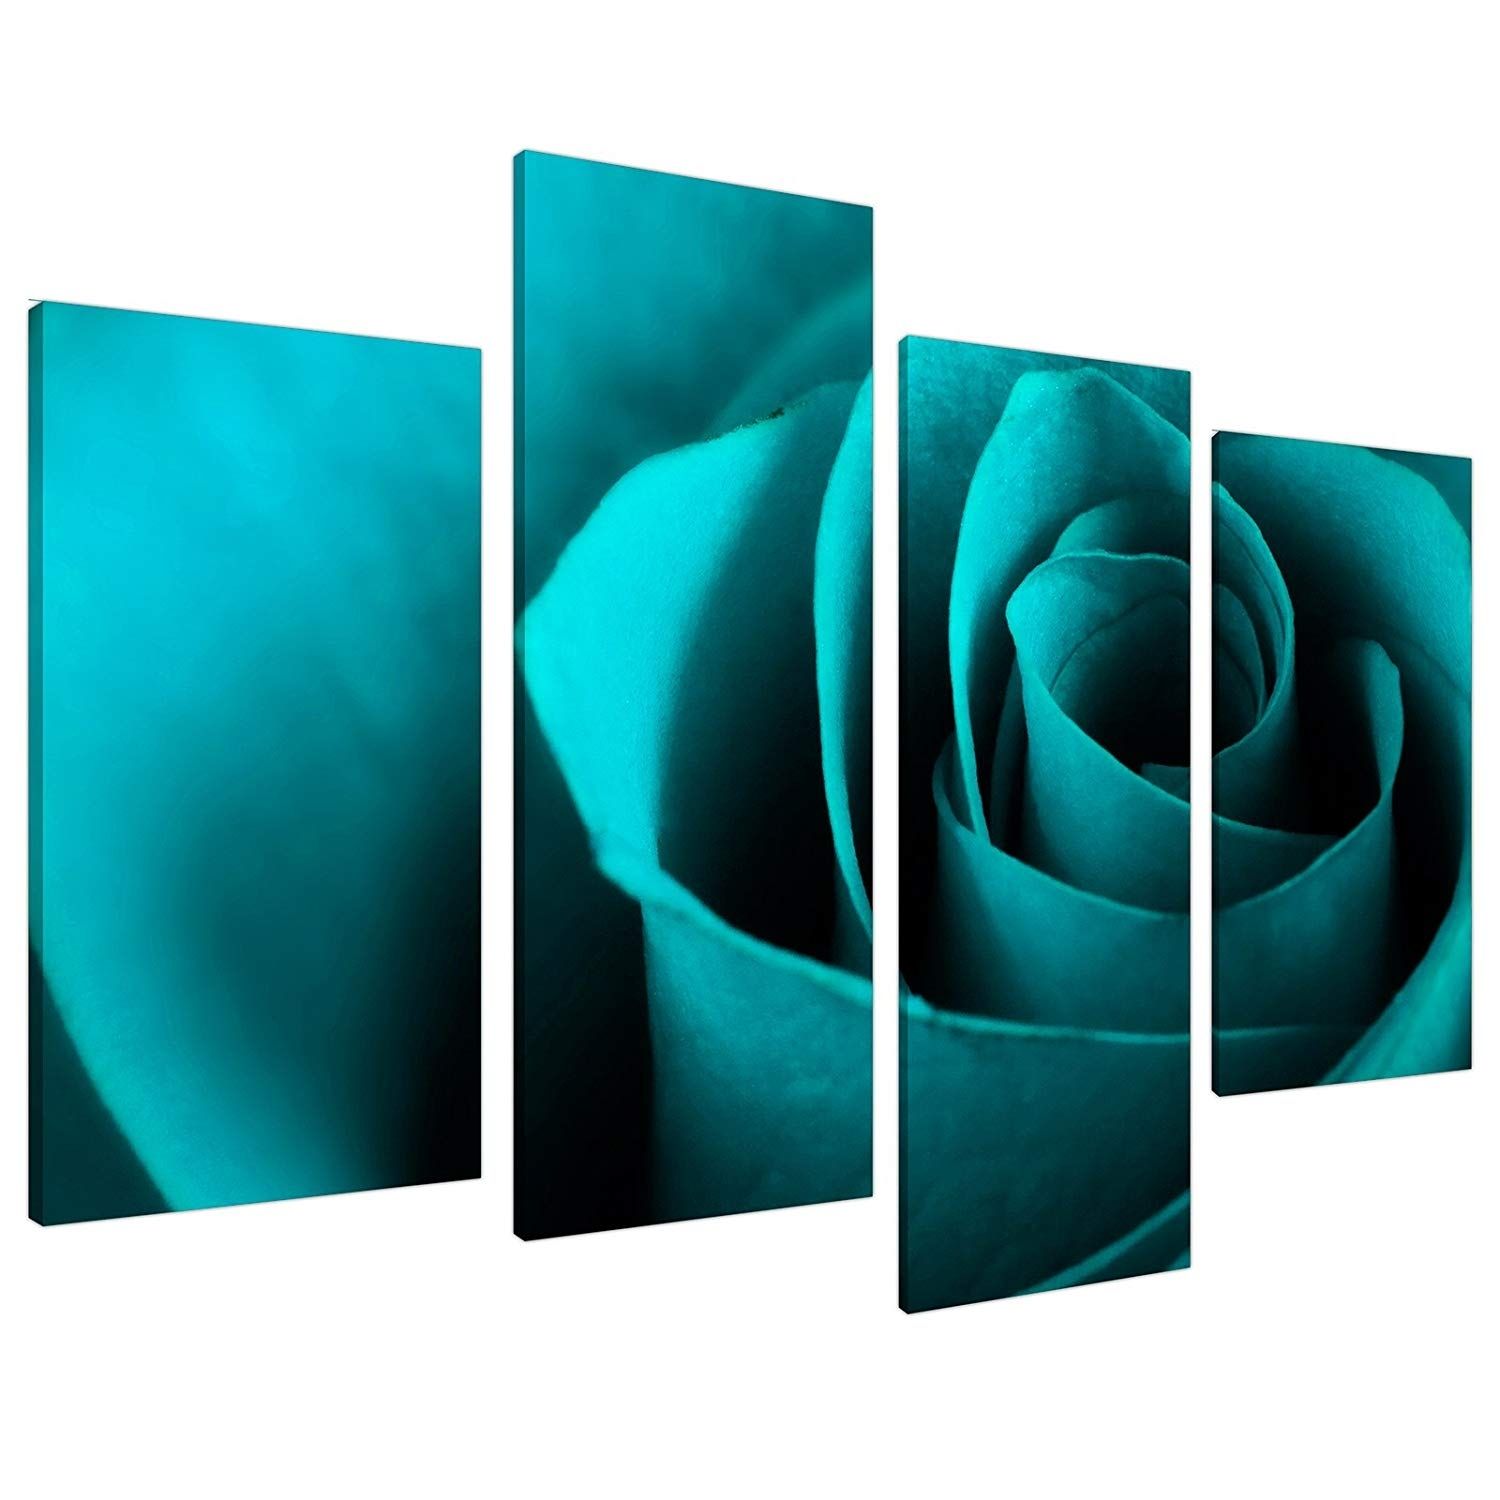 Large Teal Turquoise Floral Canvas Wall Art Pictures Xl Prints 4109 Regarding Turquoise Wall Art (Photo 6 of 20)